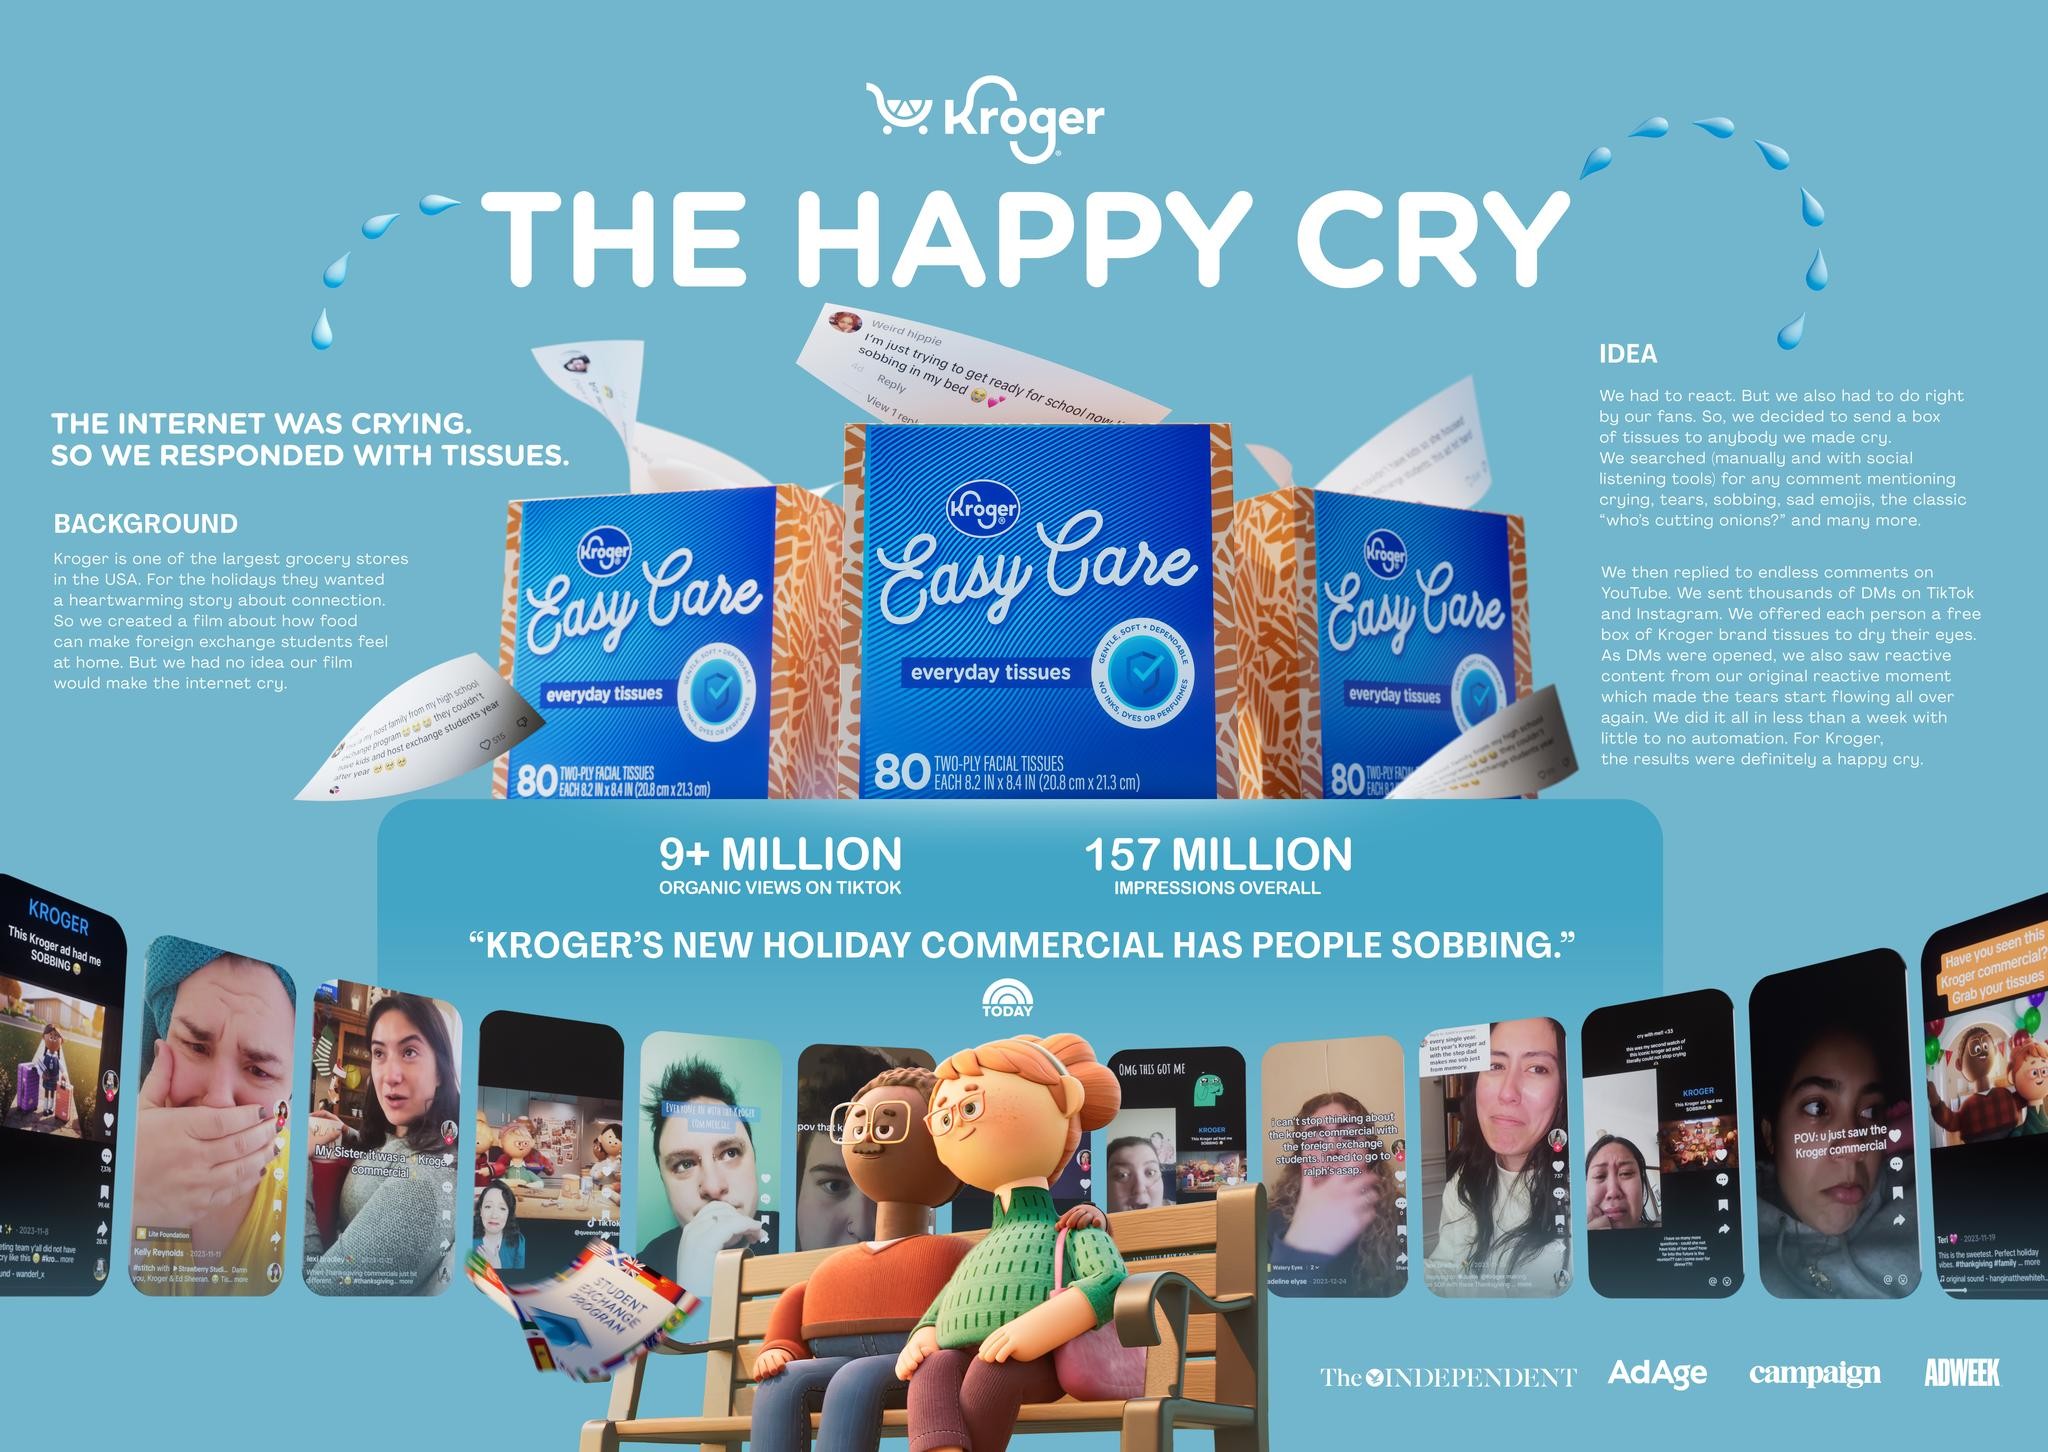 The Happy Cry